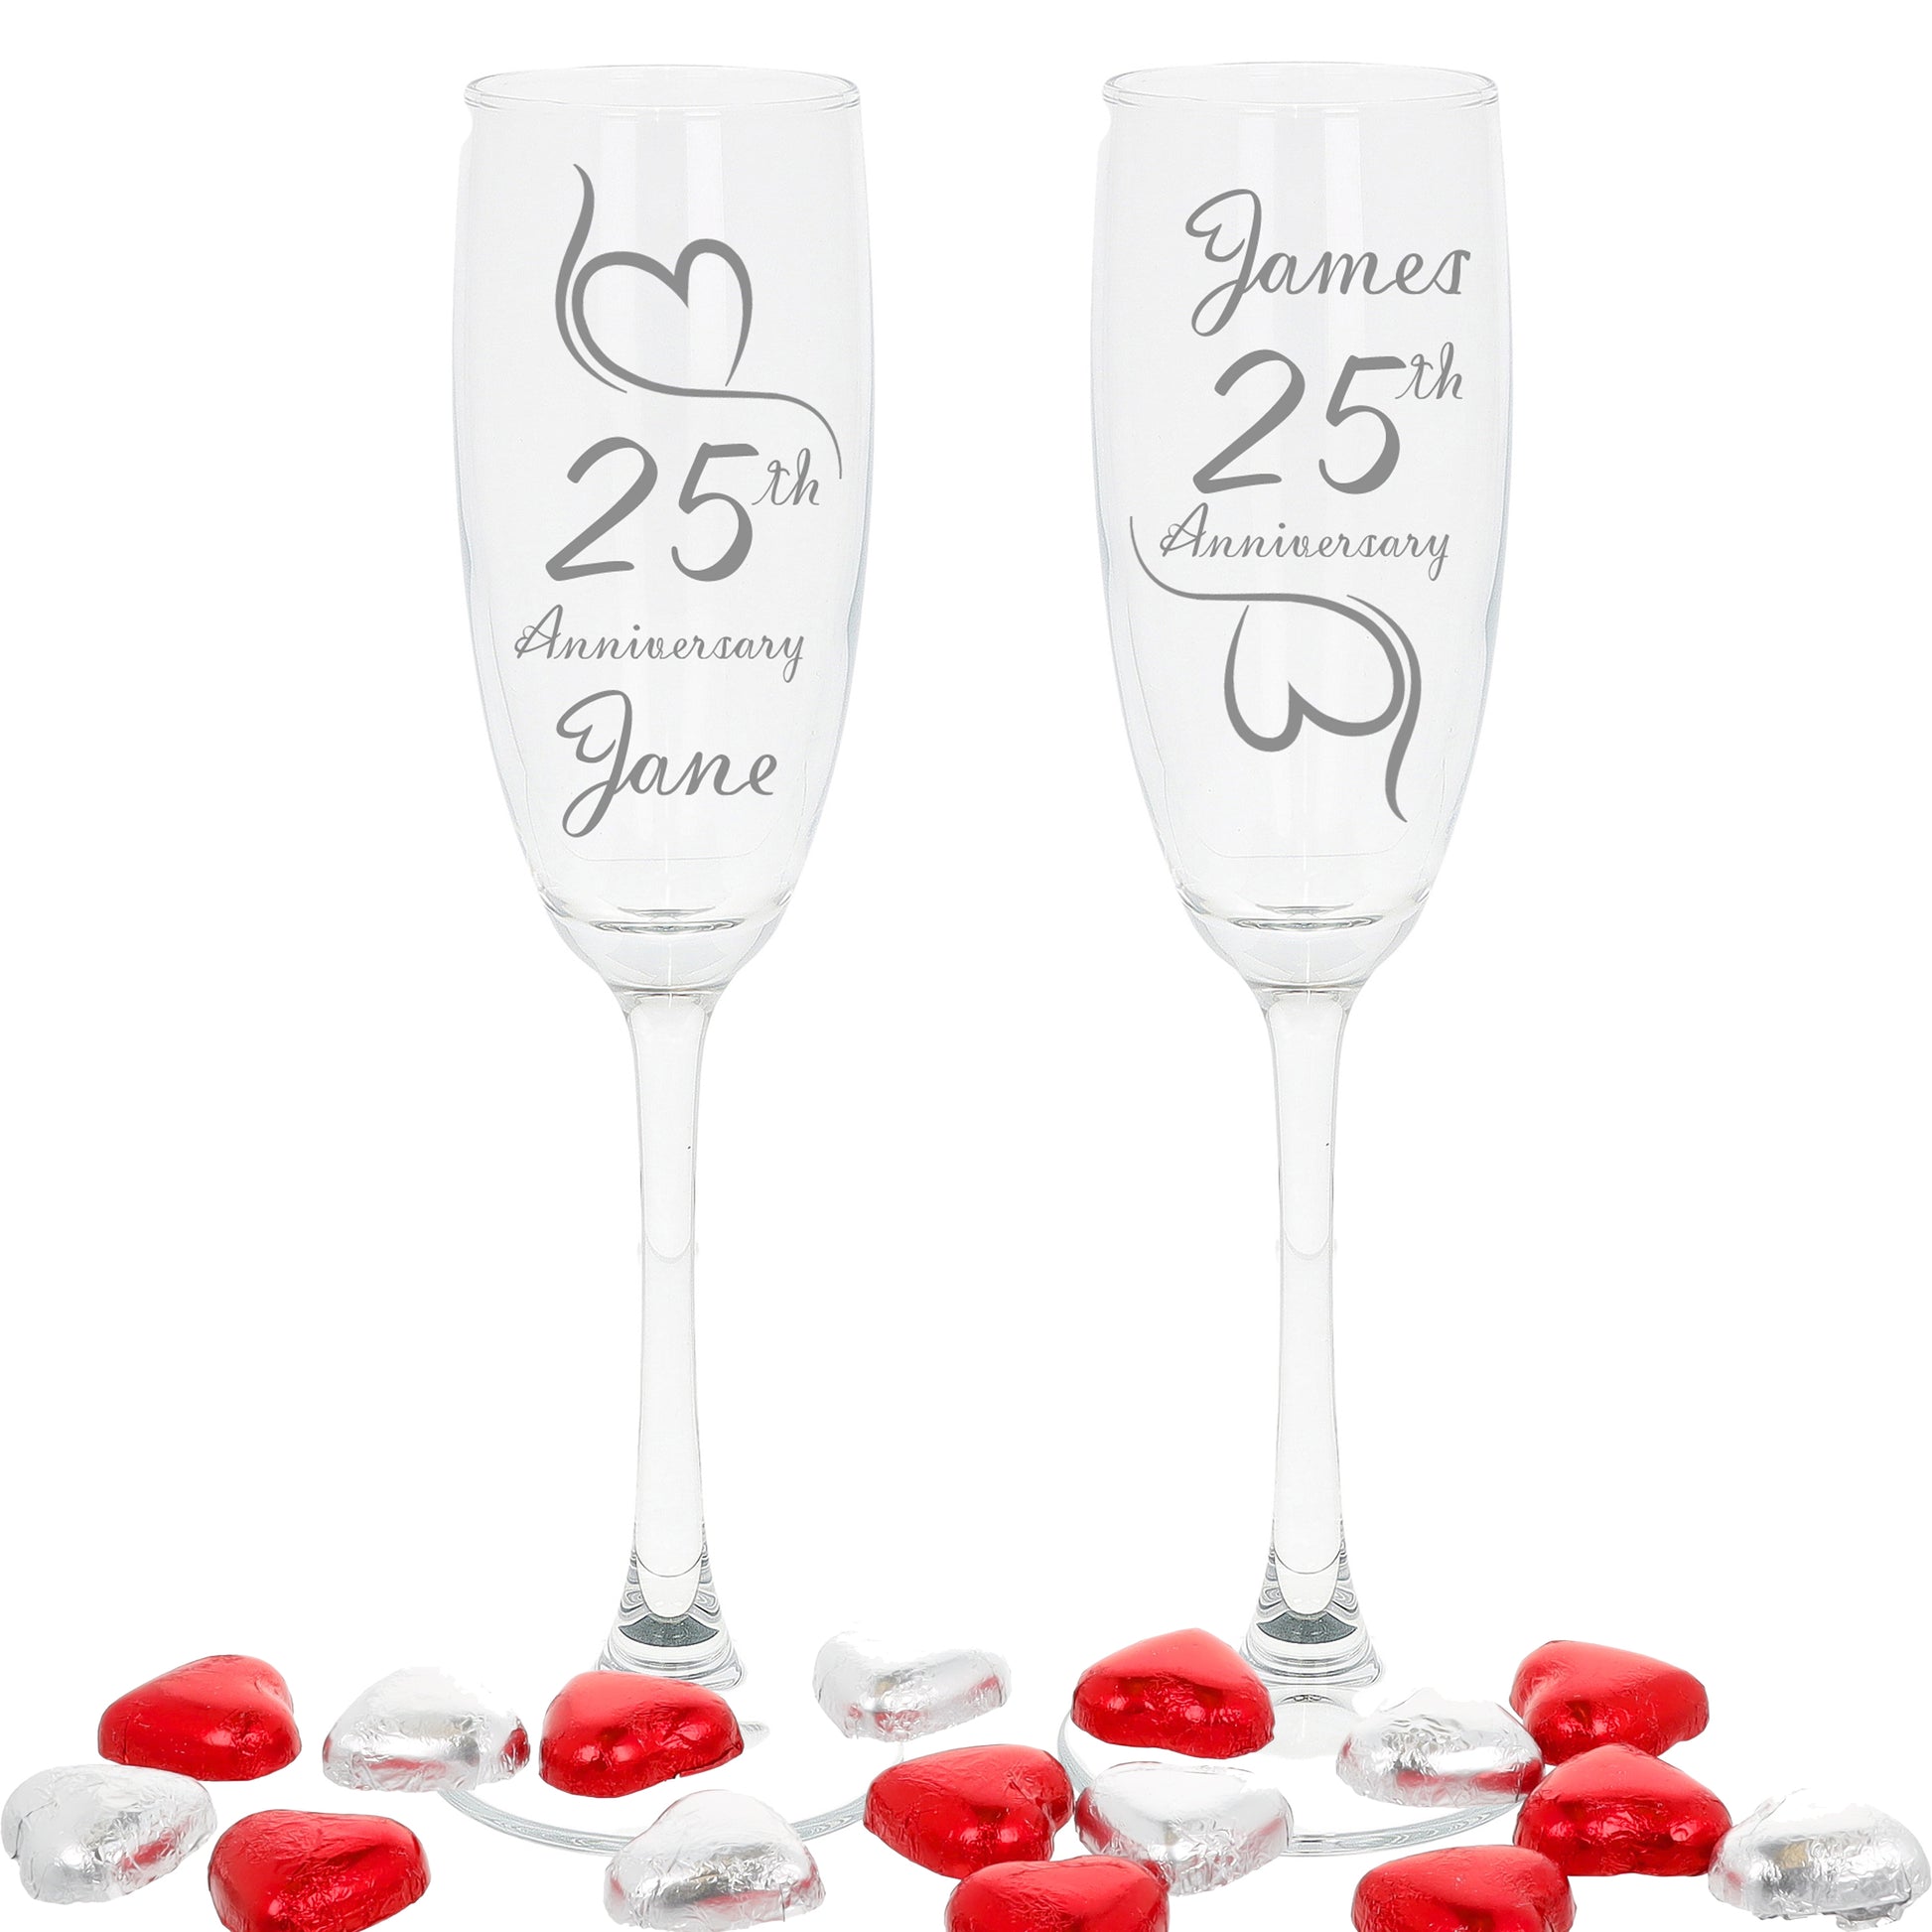 Engraved 25th Silver Wedding Anniversary Personalised Engraved Champagne Glass Gift Set  - Always Looking Good -   